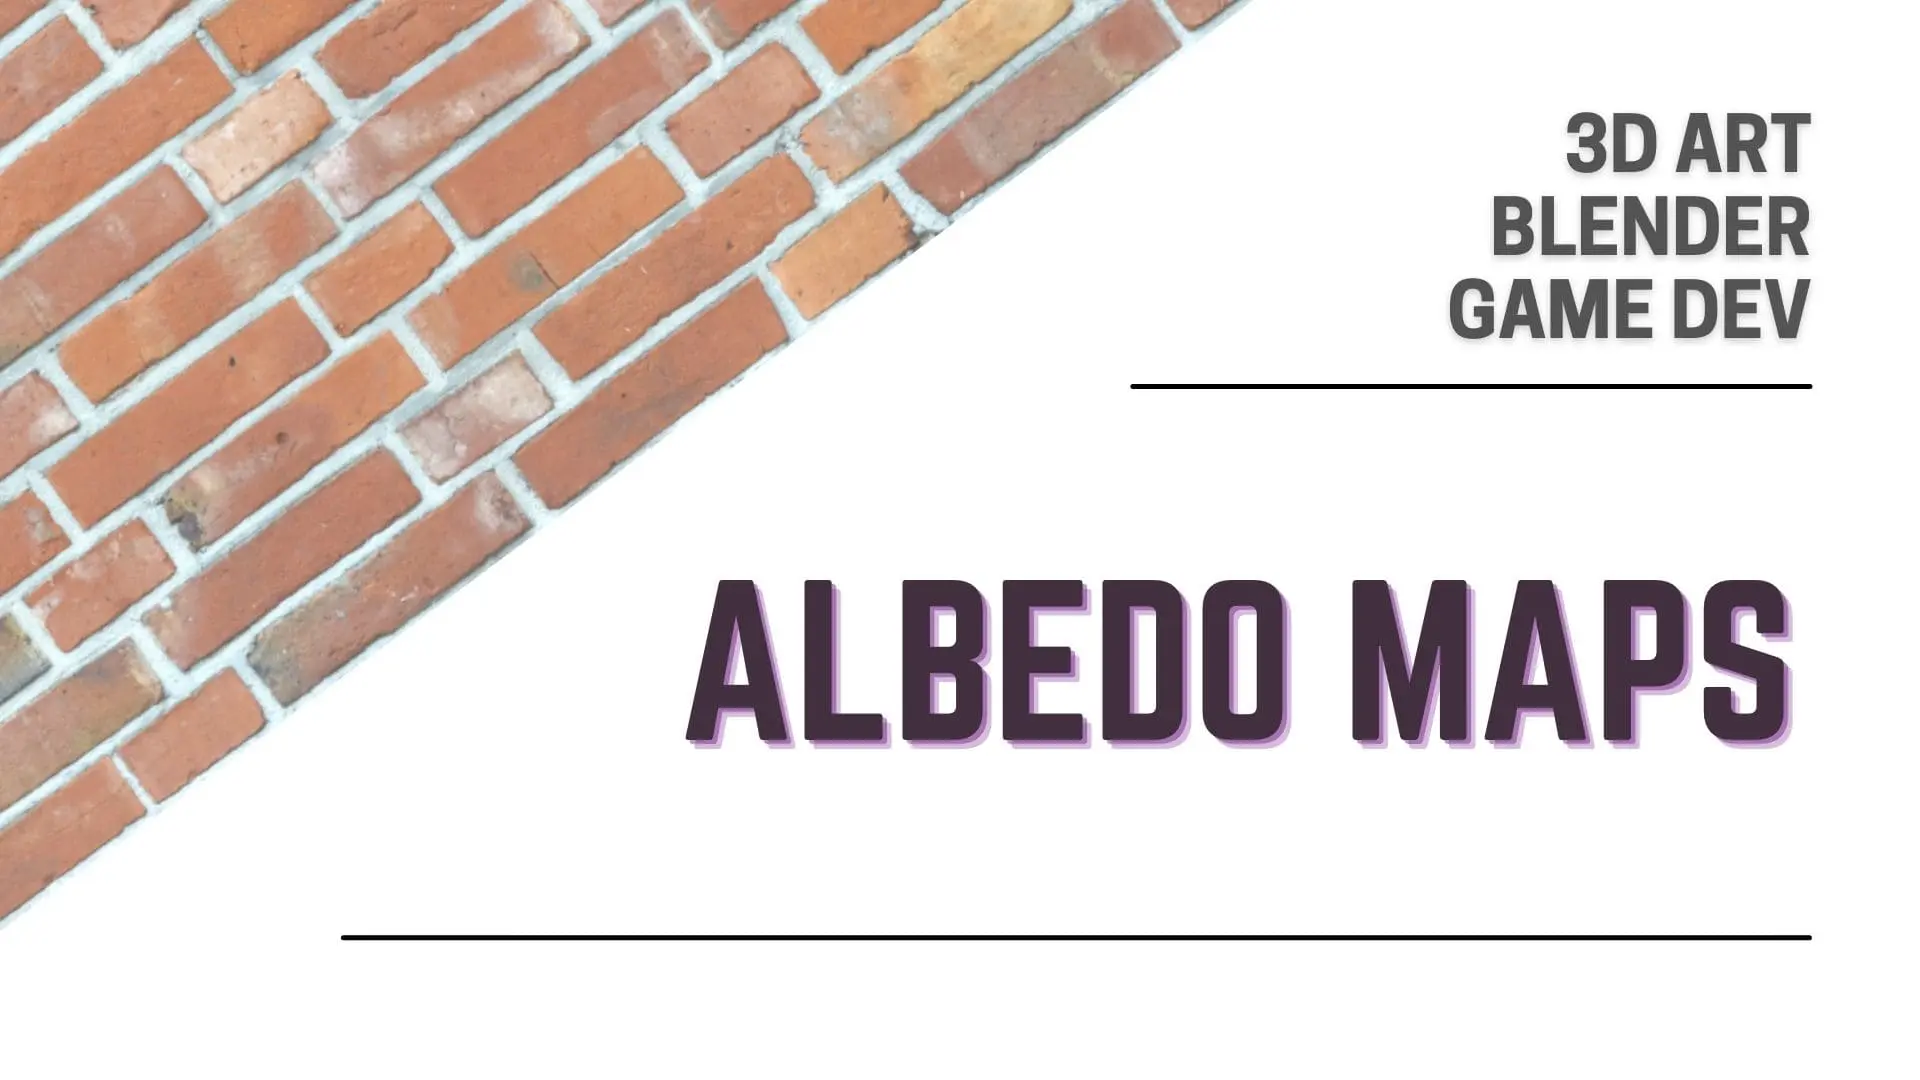 Albedo Map - Article Featured Image - CG - Basics Of 3D Art For Game Development Tutorial